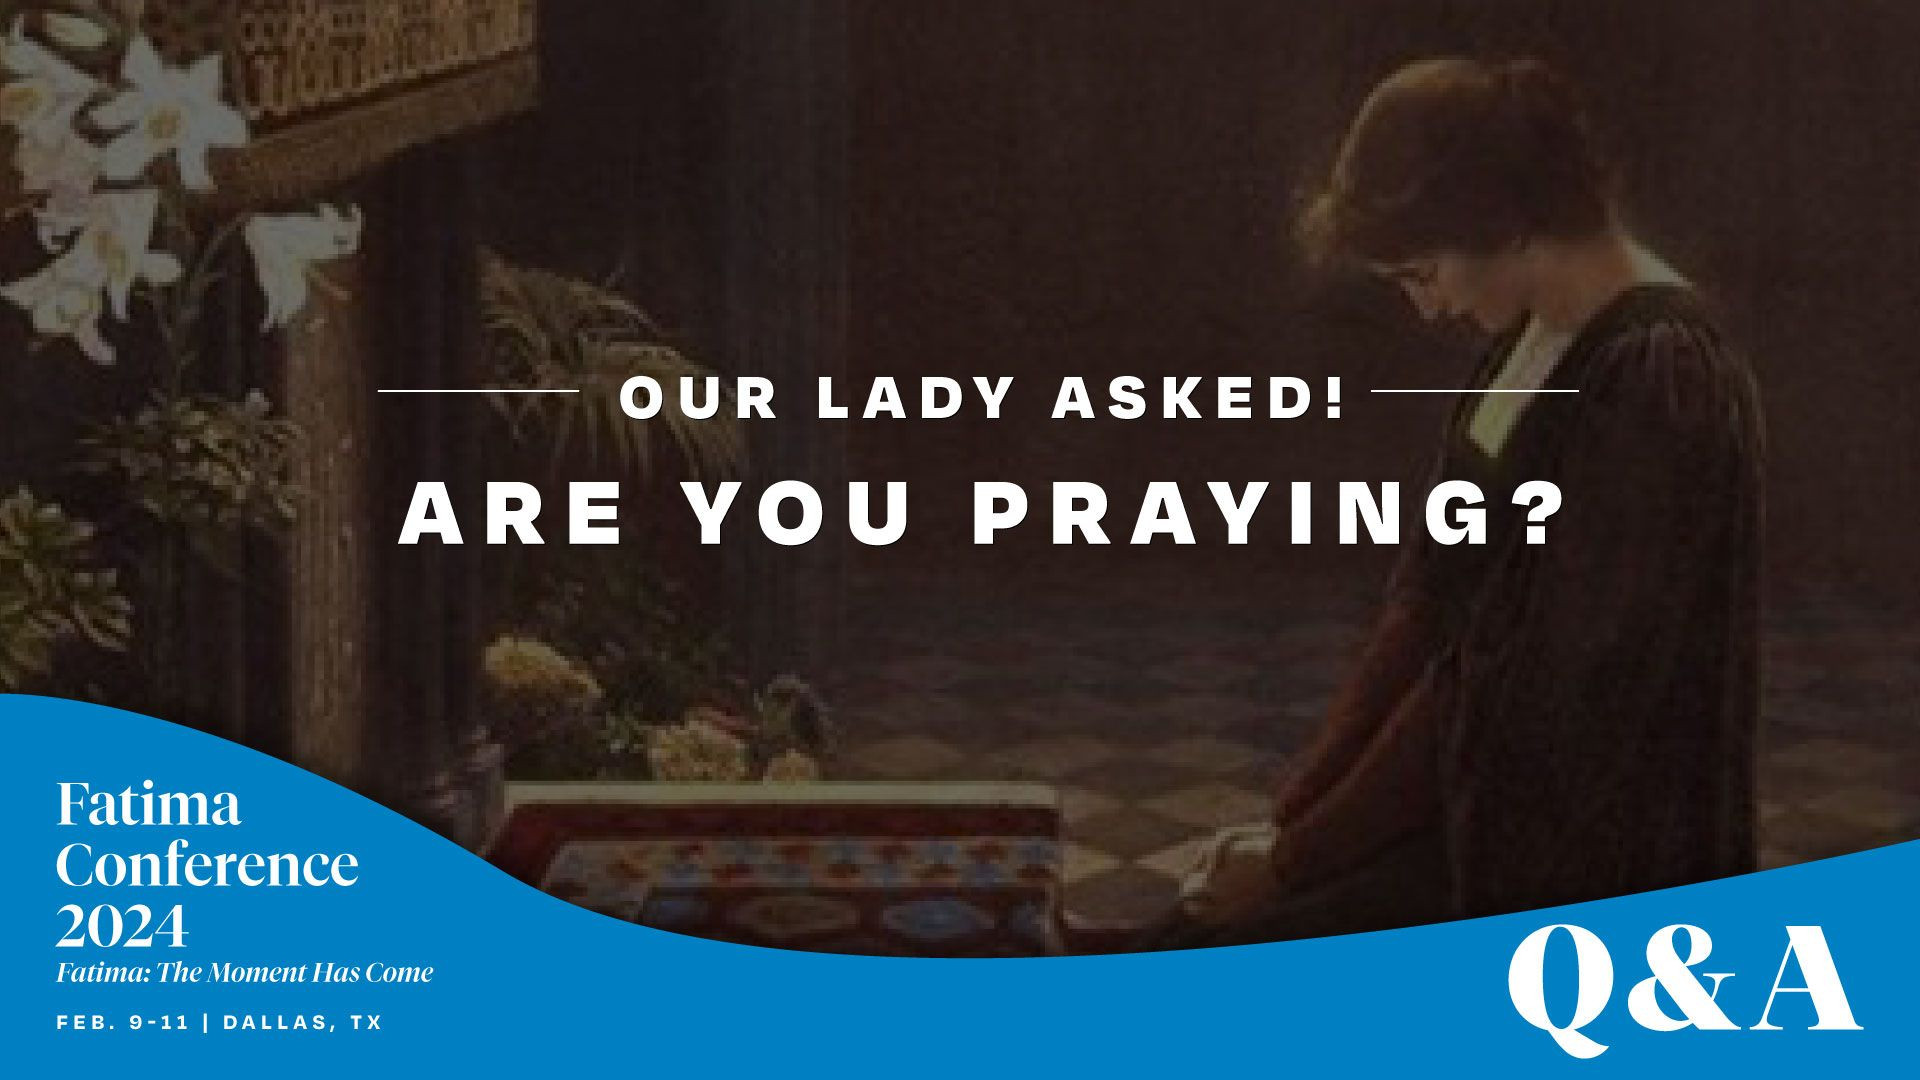 Our Lady at Fatima asked us to pray for THESE specific things